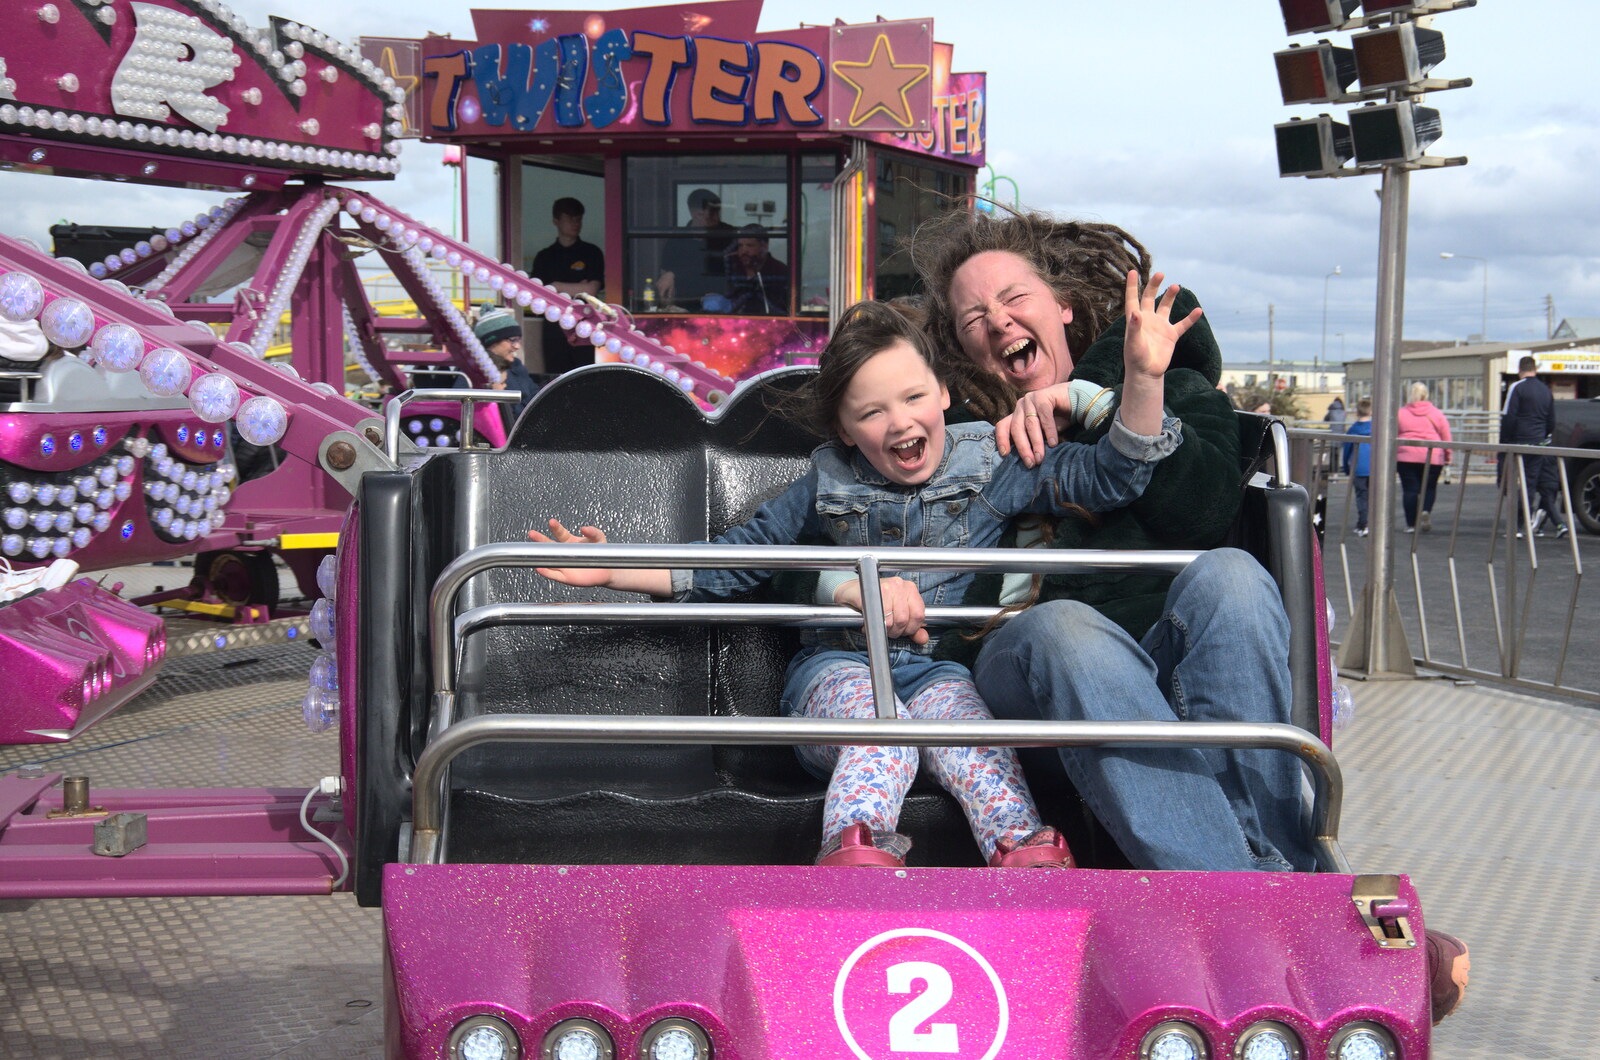 Faith and Davida are having a good time on Twister from Manorhamilton and Bundoran, Leitrim and Donegal, Ireland - 16th April 2022